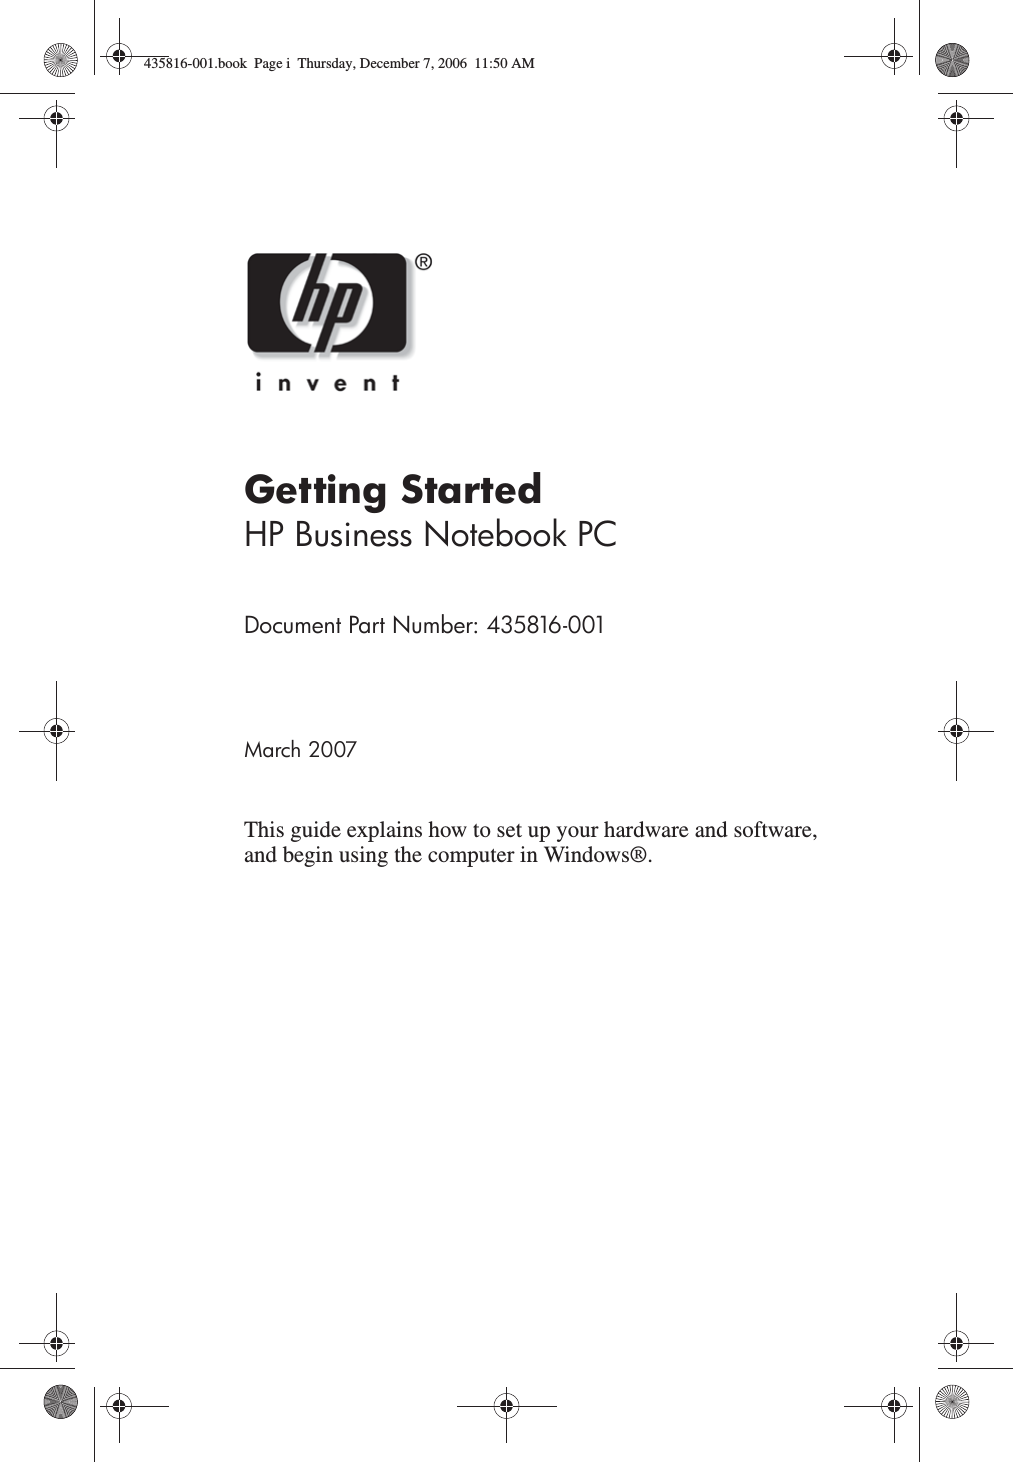 Getting StartedHP Business Notebook PCDocument Part Number: 435816-001March 2007This guide explains how to set up your hardware and software, and begin using the computer in Windows®.435816-001.book  Page i  Thursday, December 7, 2006  11:50 AM